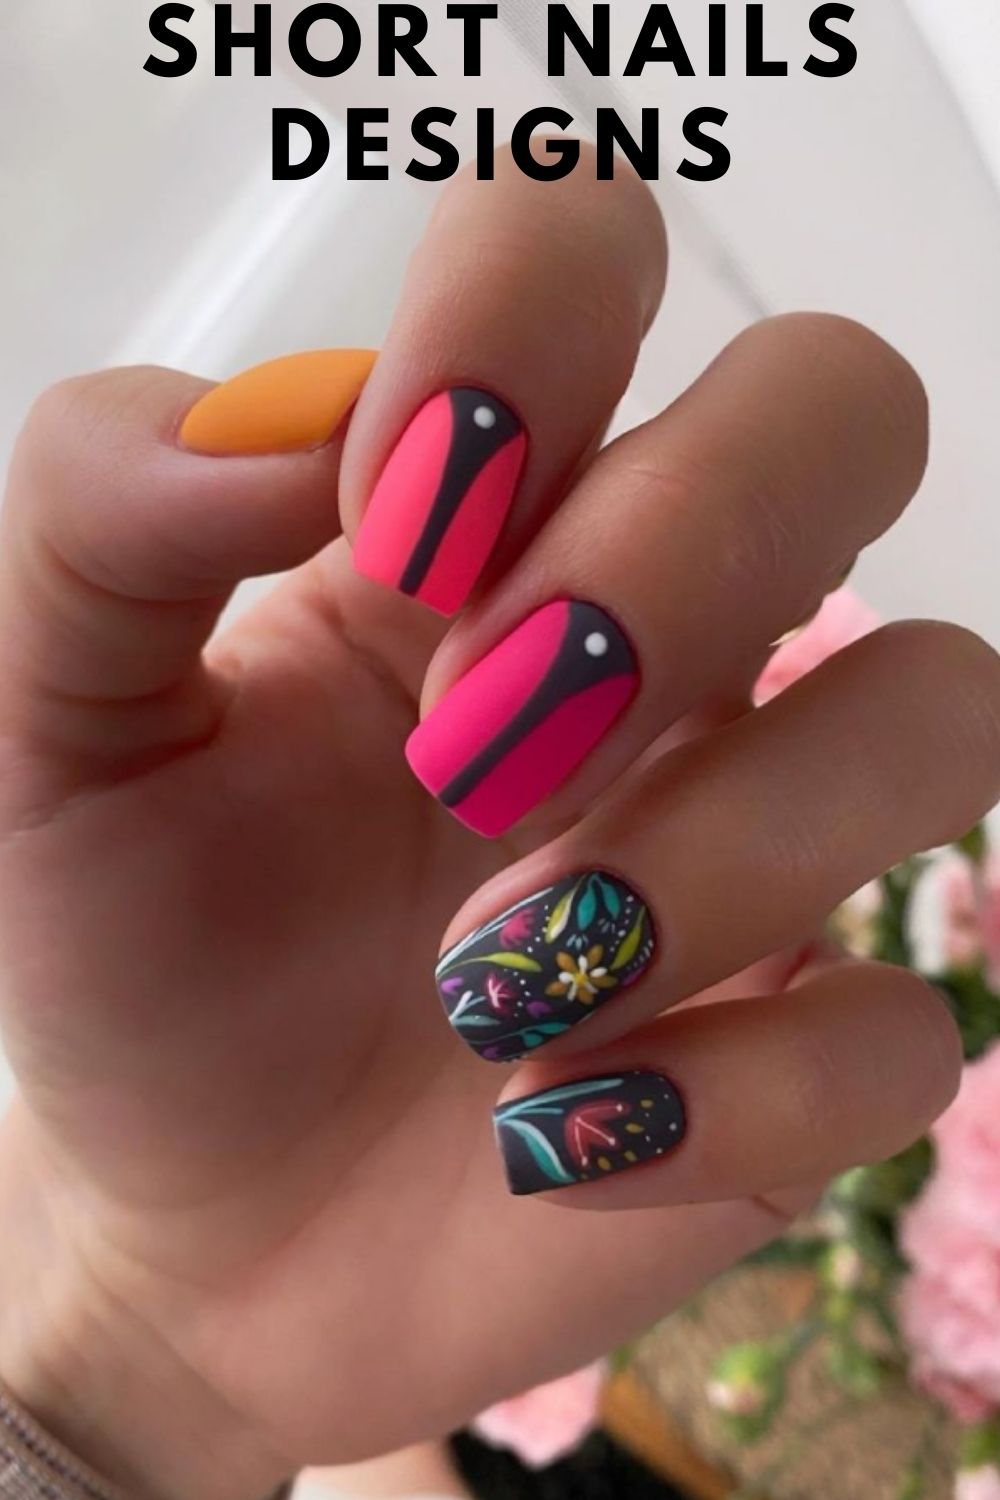 Red and black nails designs